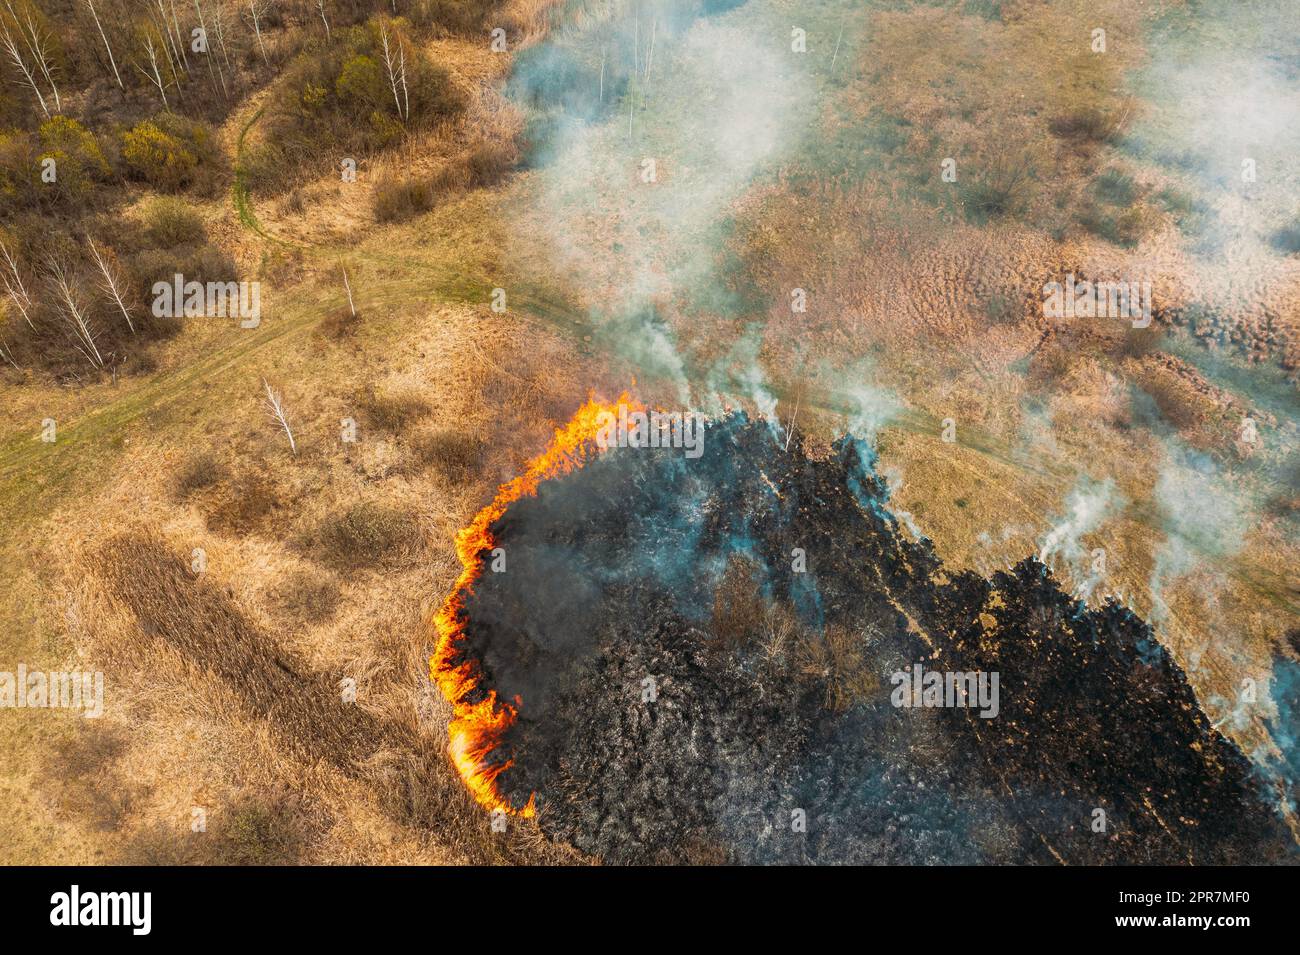 Aerial View. Dry Grass Burns During Drought And Hot Weather. Bush Fire And Smoke In Meadow Field. Wild Open Fire Destroys Grass. Nature In Danger. Ecological Problem Air Pollution. Natural Disaster Stock Photo